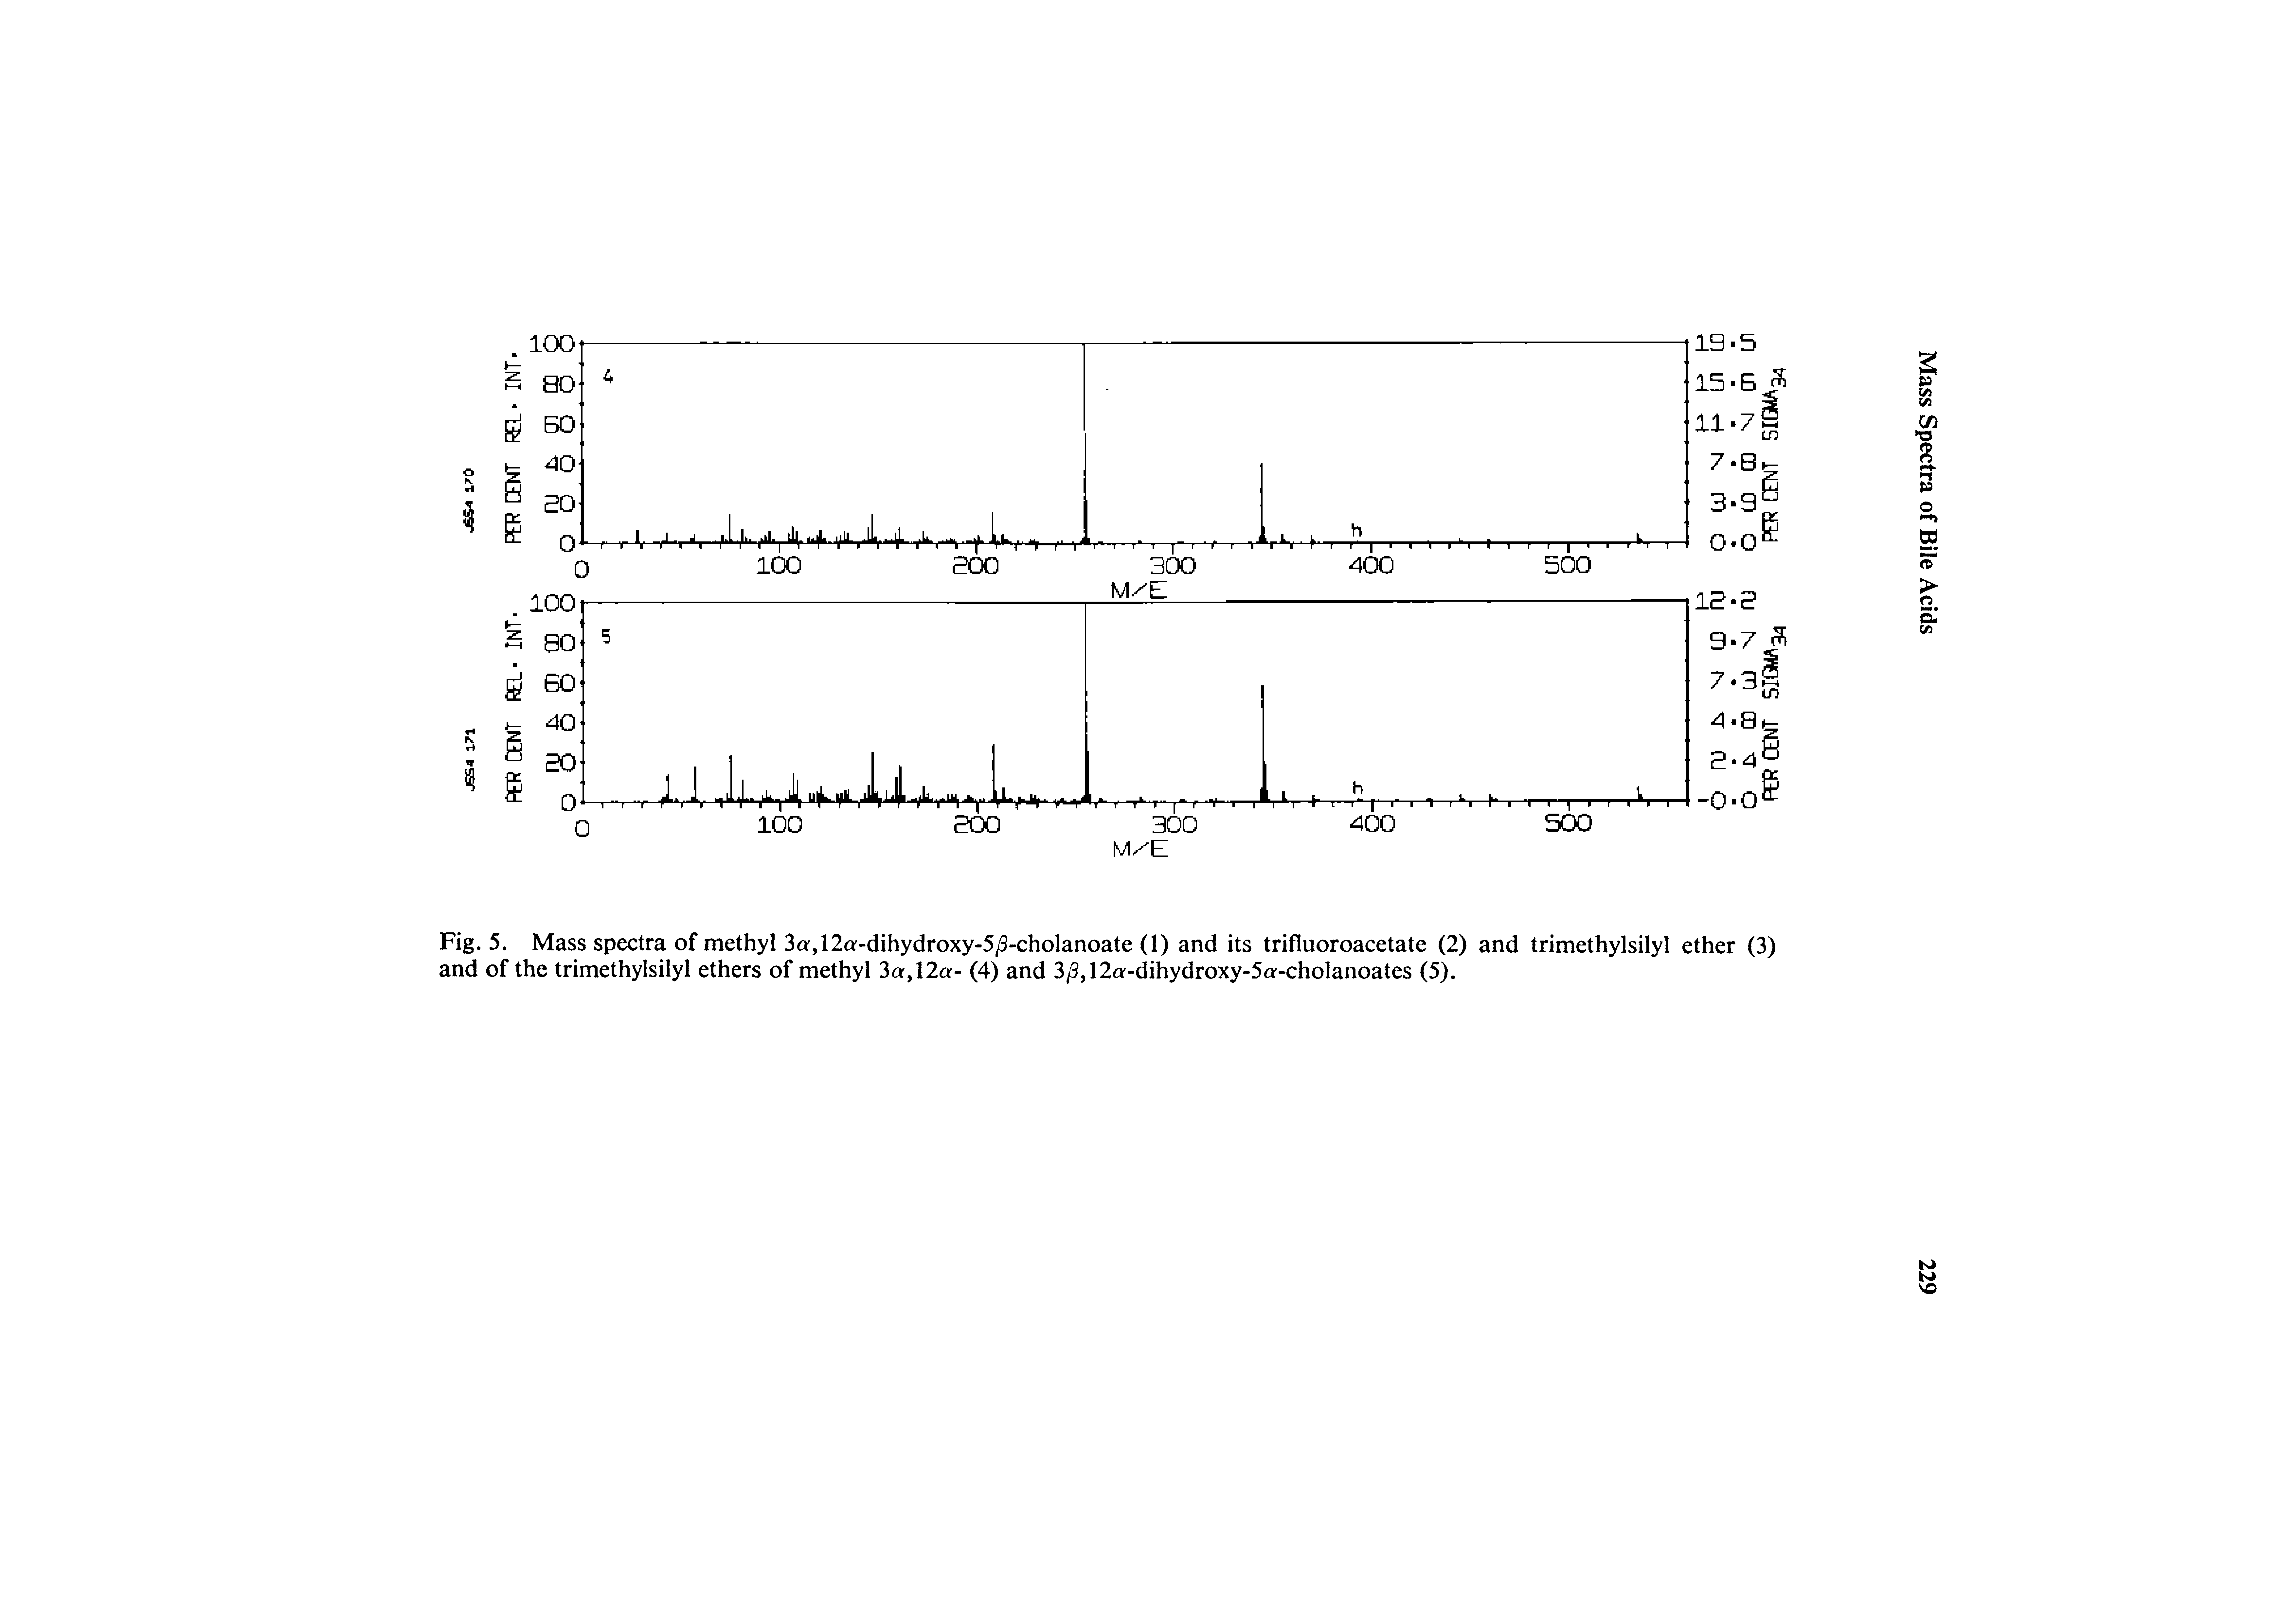 Fig. 5. Mass spectra of methyl 3a,12a-dihydroxy-5/3-cholanoate (1) and its trifluoroacetate (2) and trimethylsilyl ether (3) and of the trimethylsilyl ethers of methyl 3a,12a> (4) and 3, 12o >dihydroxy>5a -cholanoates (5).